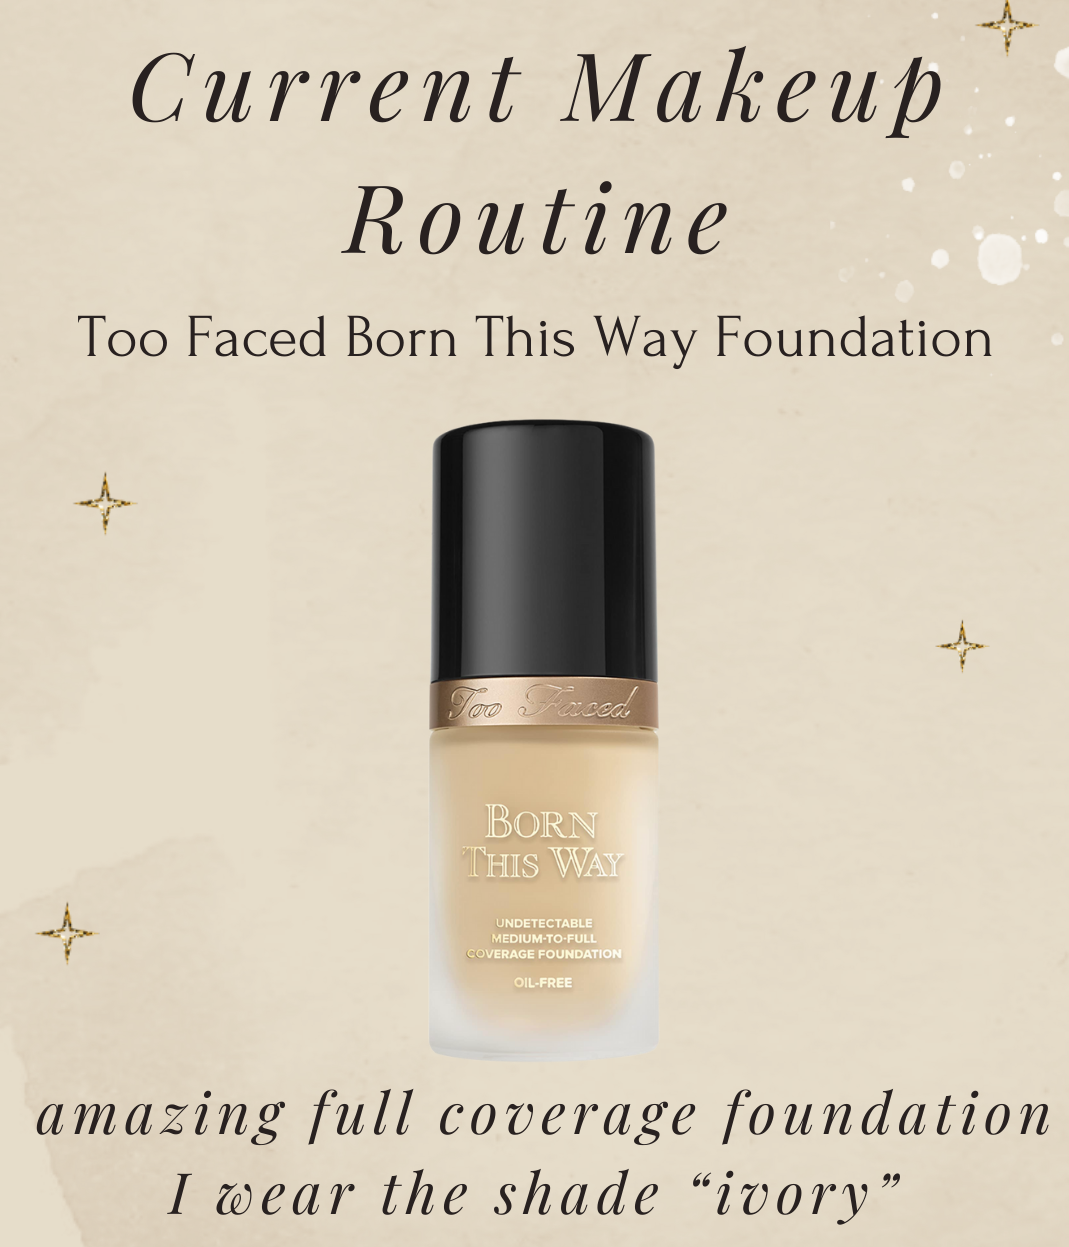 Too Faced Born This Way Foundation - Affordable by Amanda